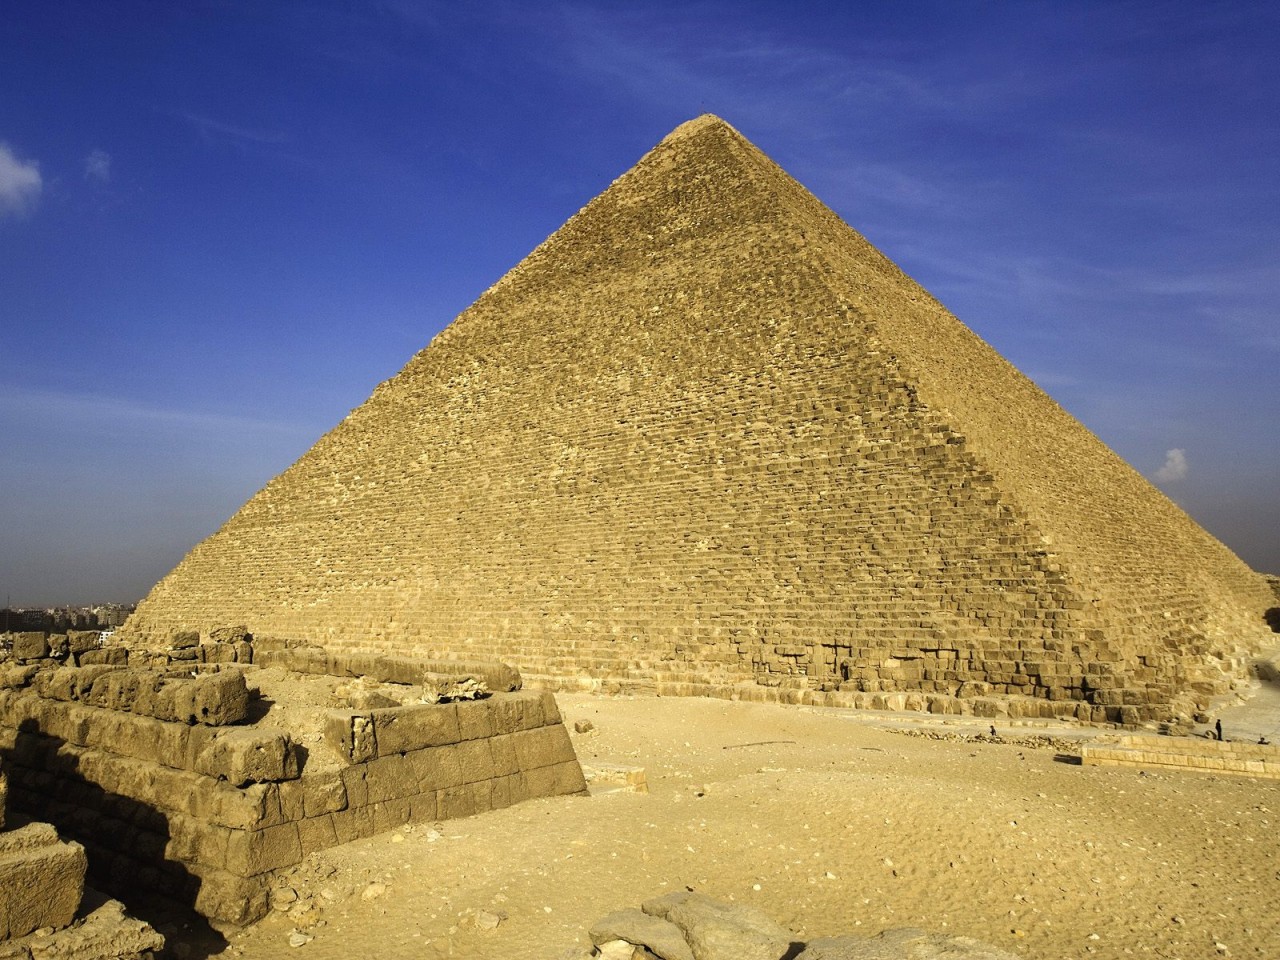 The Great Pyramid Egypt Wallpaper Photo Free 3d Models Free Stock Photos Desktop Wallpapers